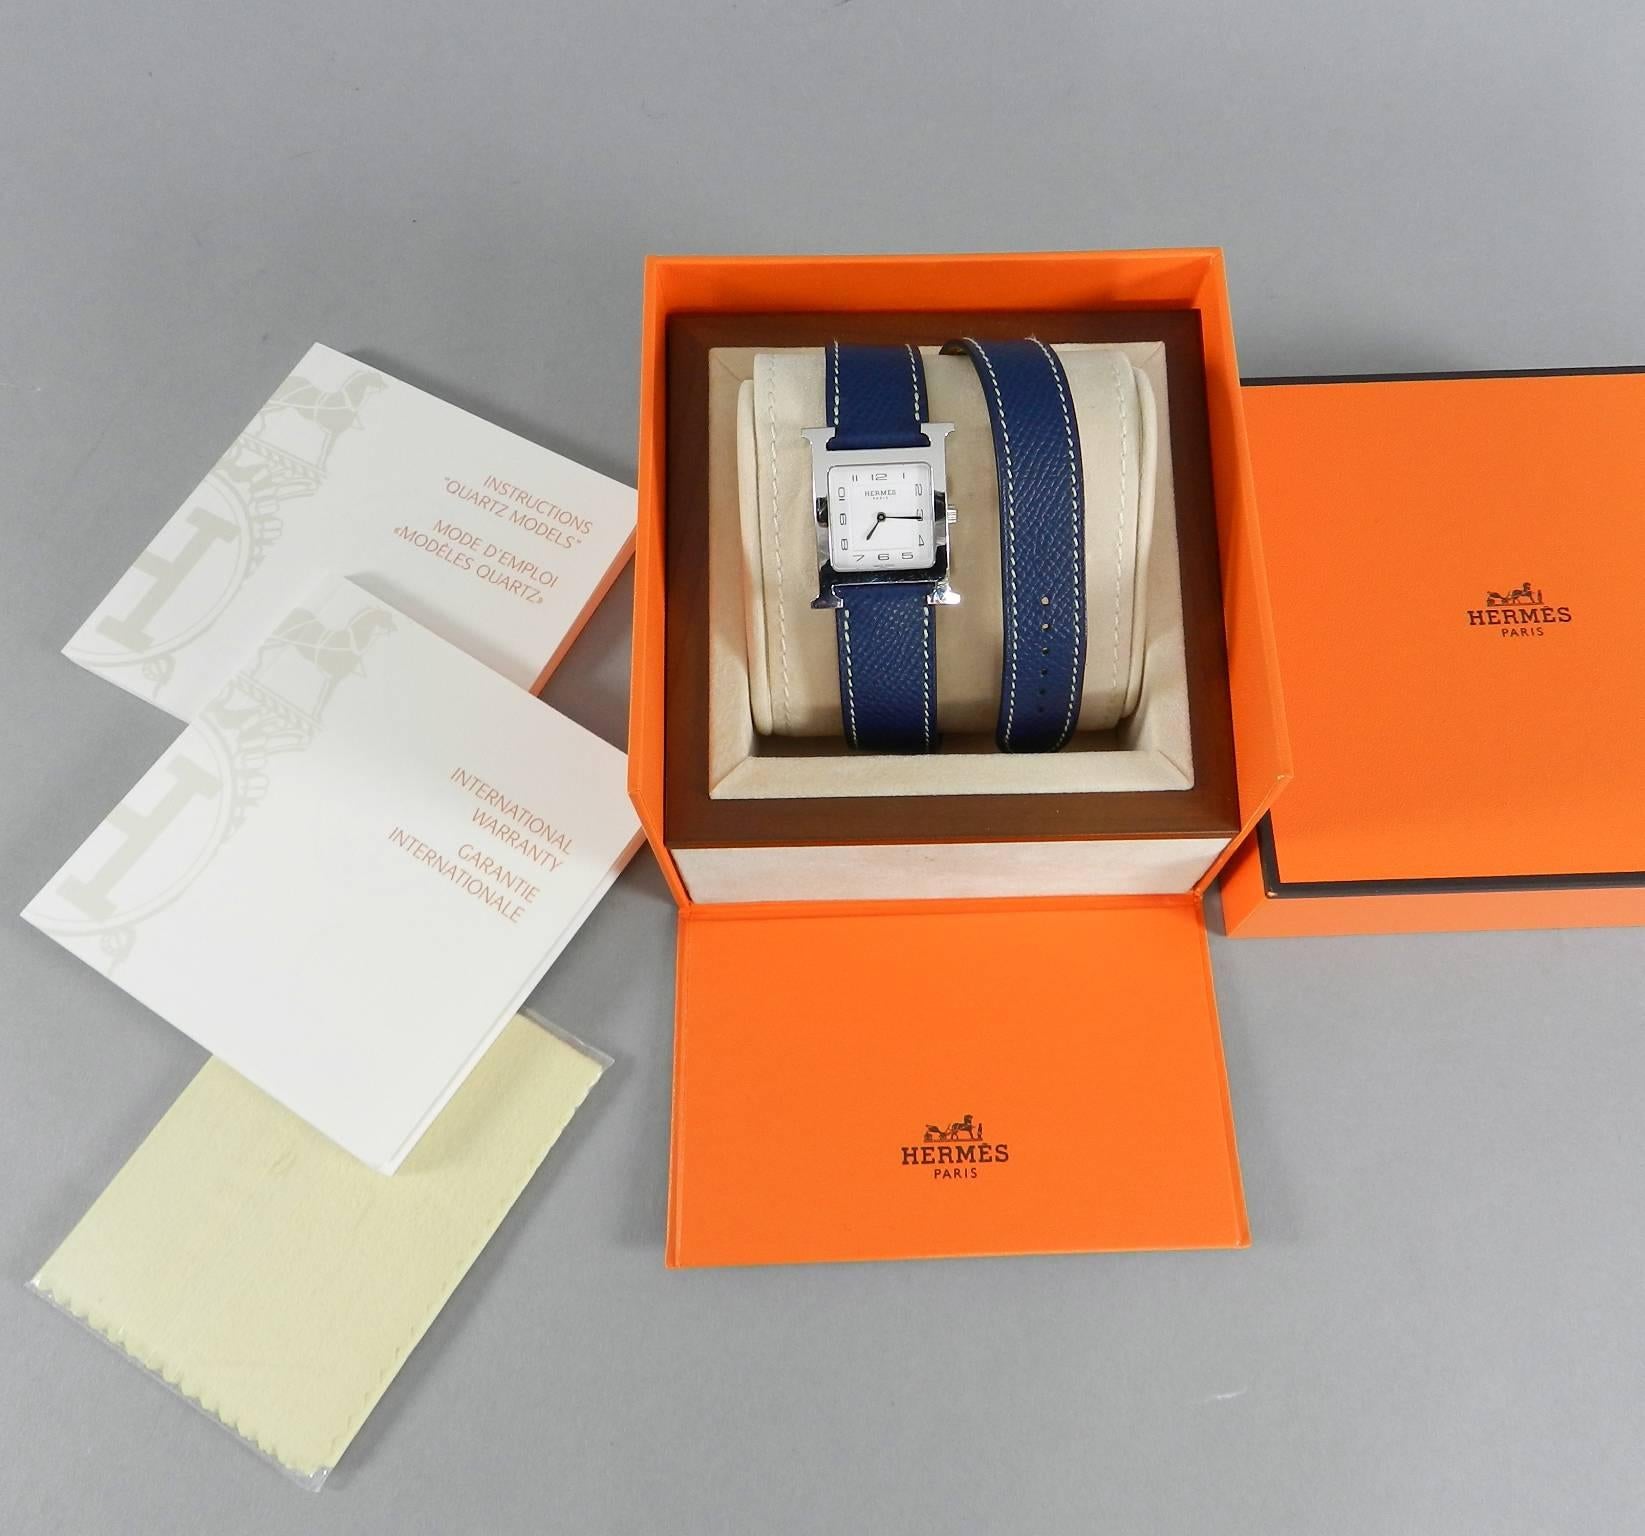 Hermes H Heure Double Tour HH1510 Medium Epsom Blue Watch.  Stainless steel H shaped case, white dial with sun pattern, quartz movement, water resistant to 3 ATM. Double wrap dark navy blue epsom leather strap.   Case size 26 x 26 mm medium size.